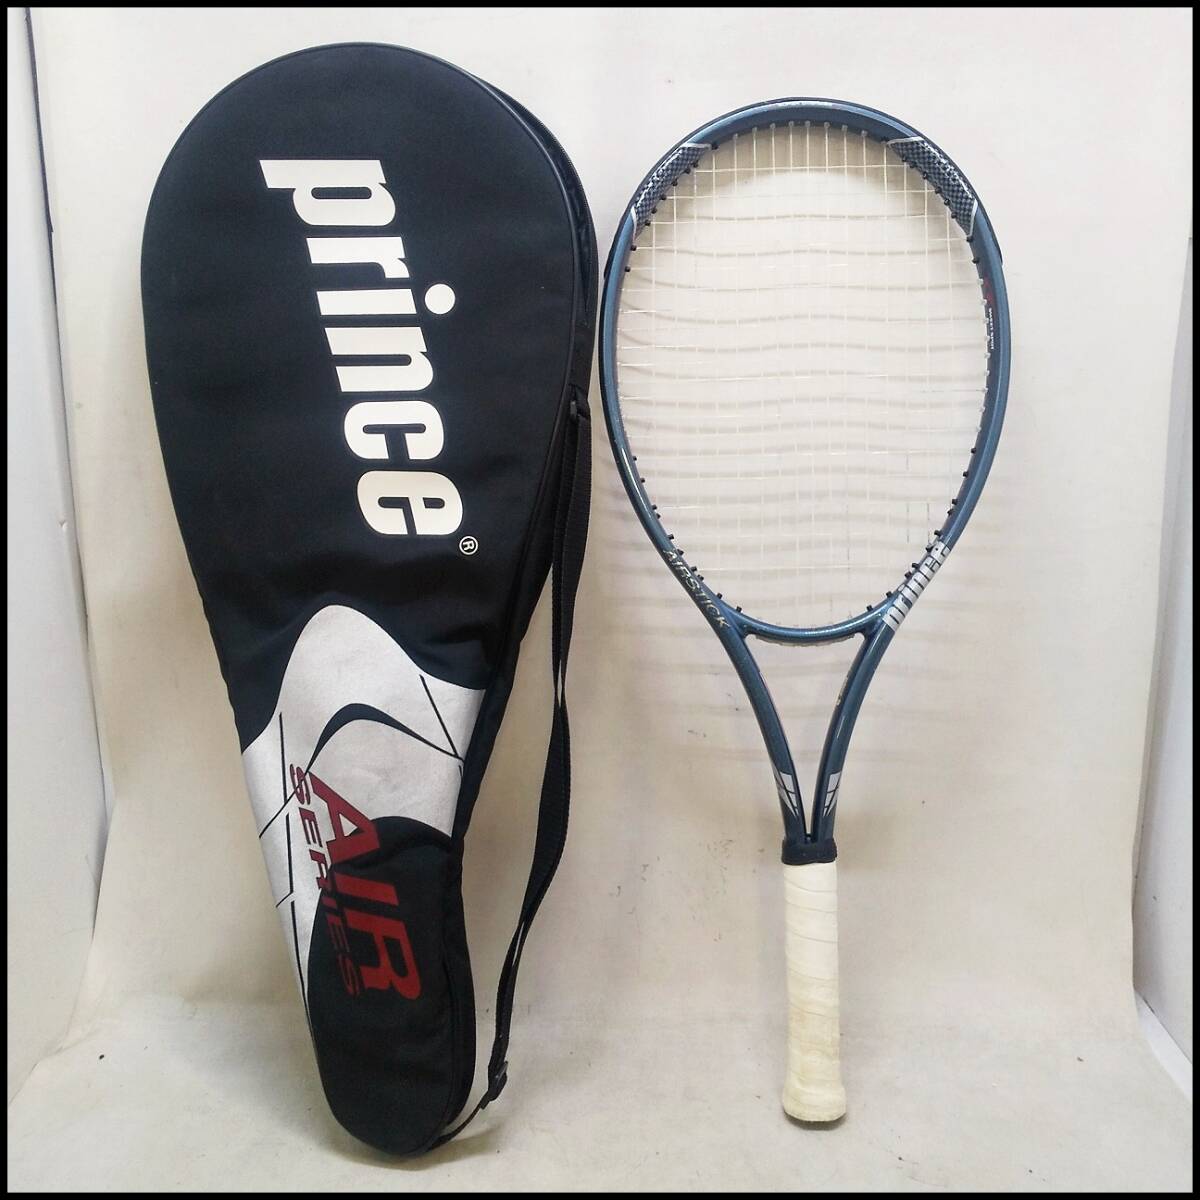 ●Prince プリンス AIRSTICK AIR HANDLE テニスラケット 硬式用 ケース付き 中古品●Ｇ2784_画像1